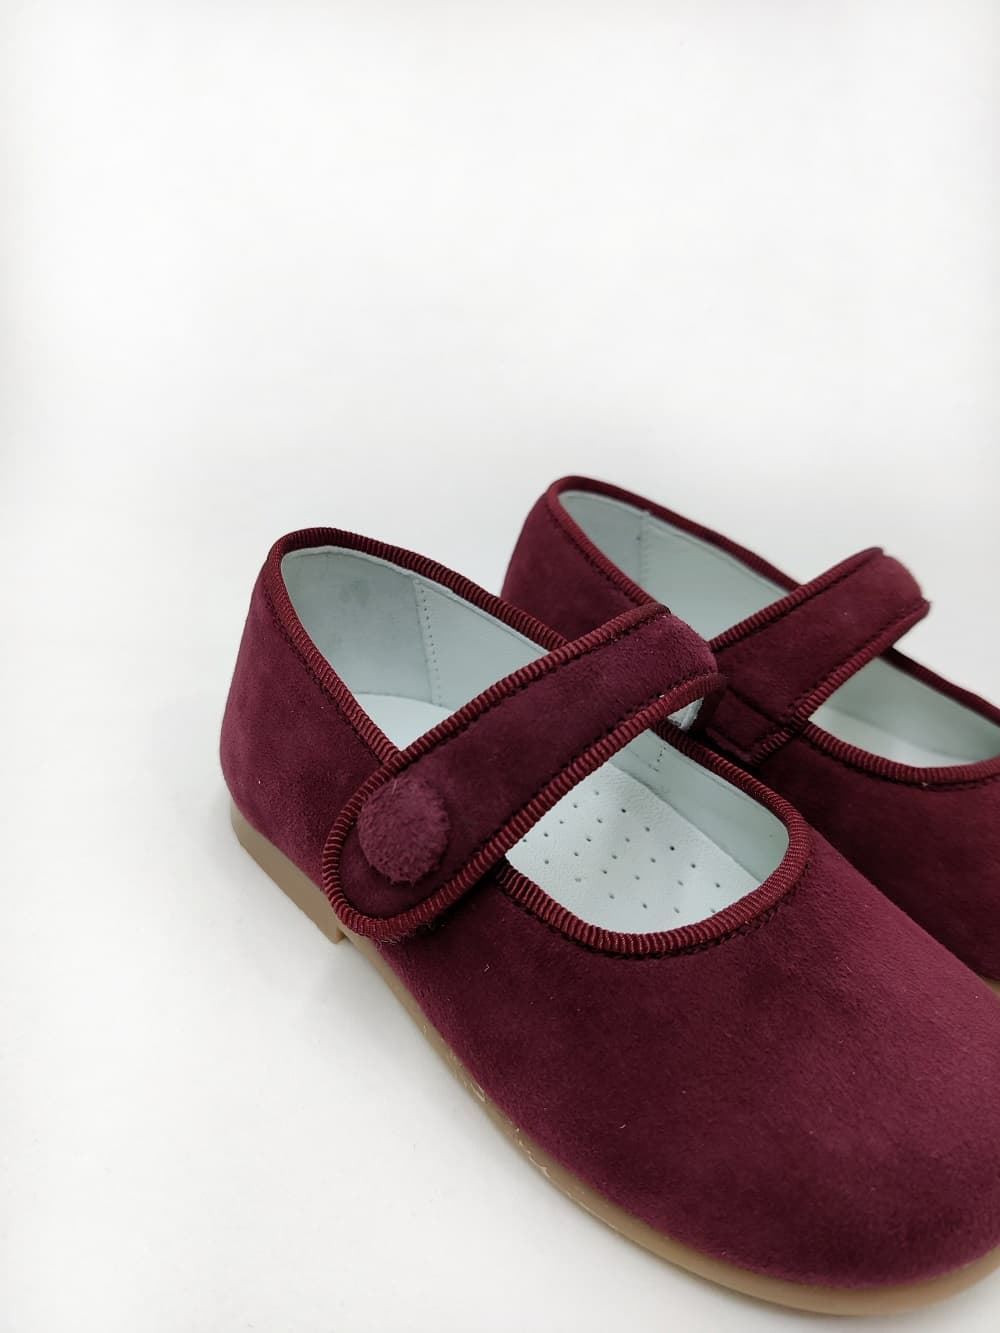 Pirufin (Piruflex) Mary Janes for baby girls in Bordeaux suede - Image 4